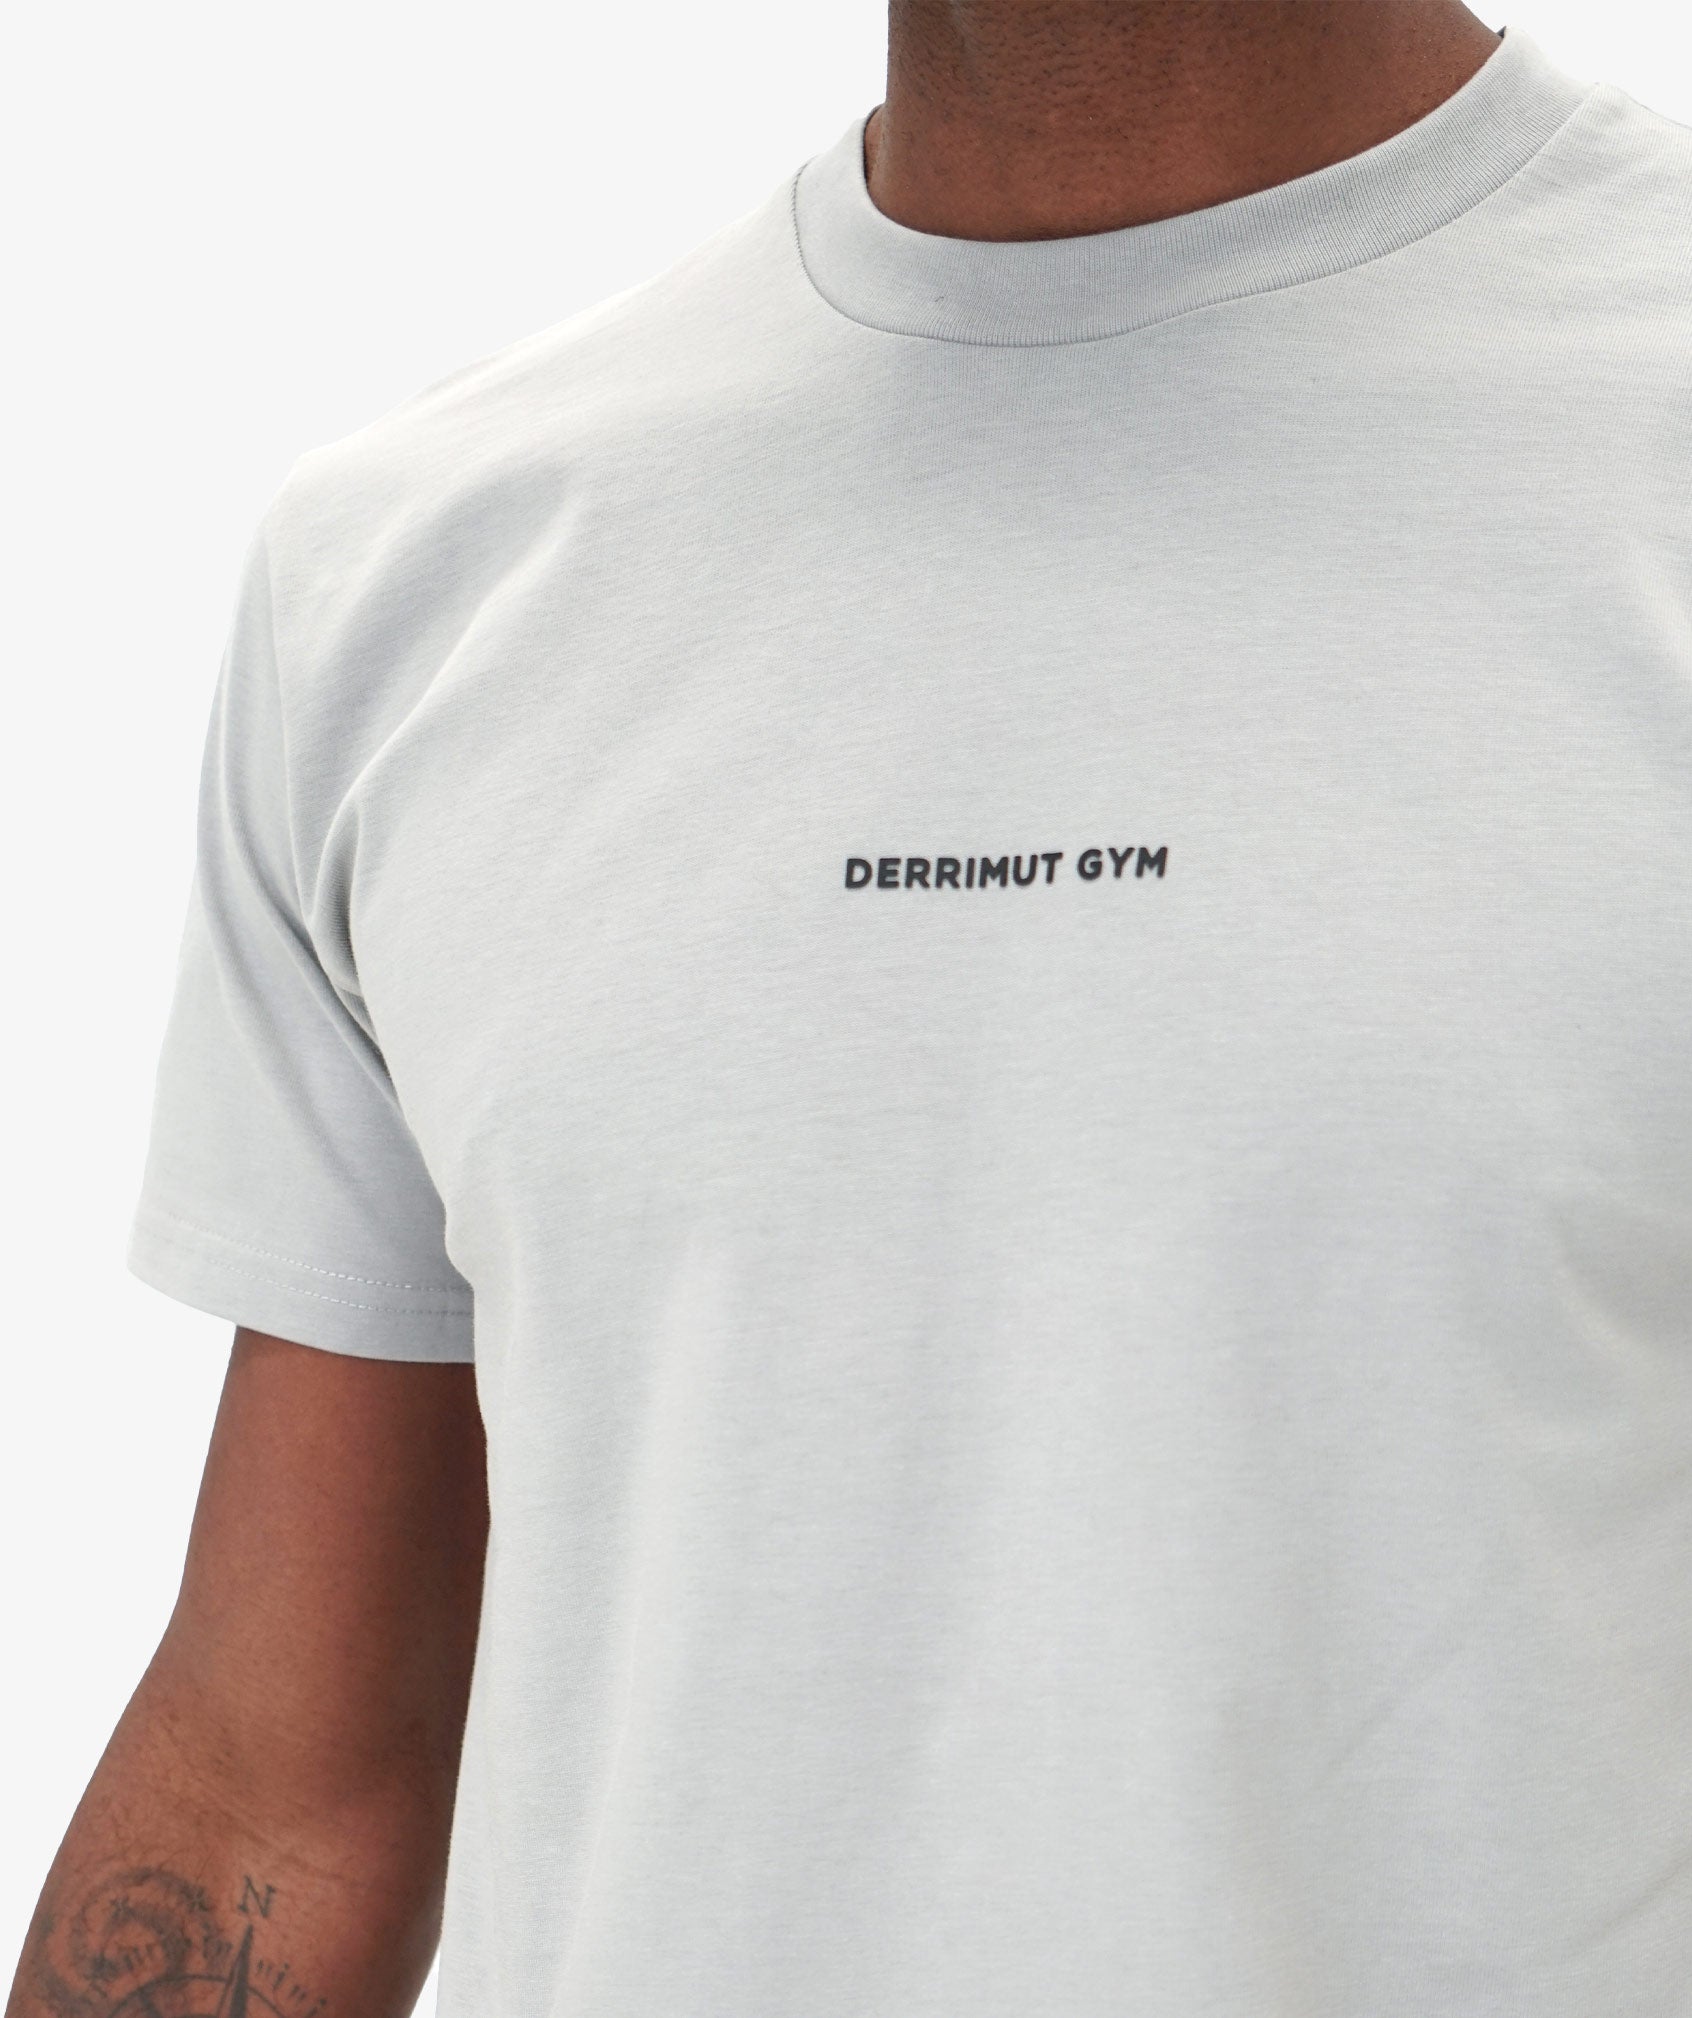 The Classic Essential Tee Grey